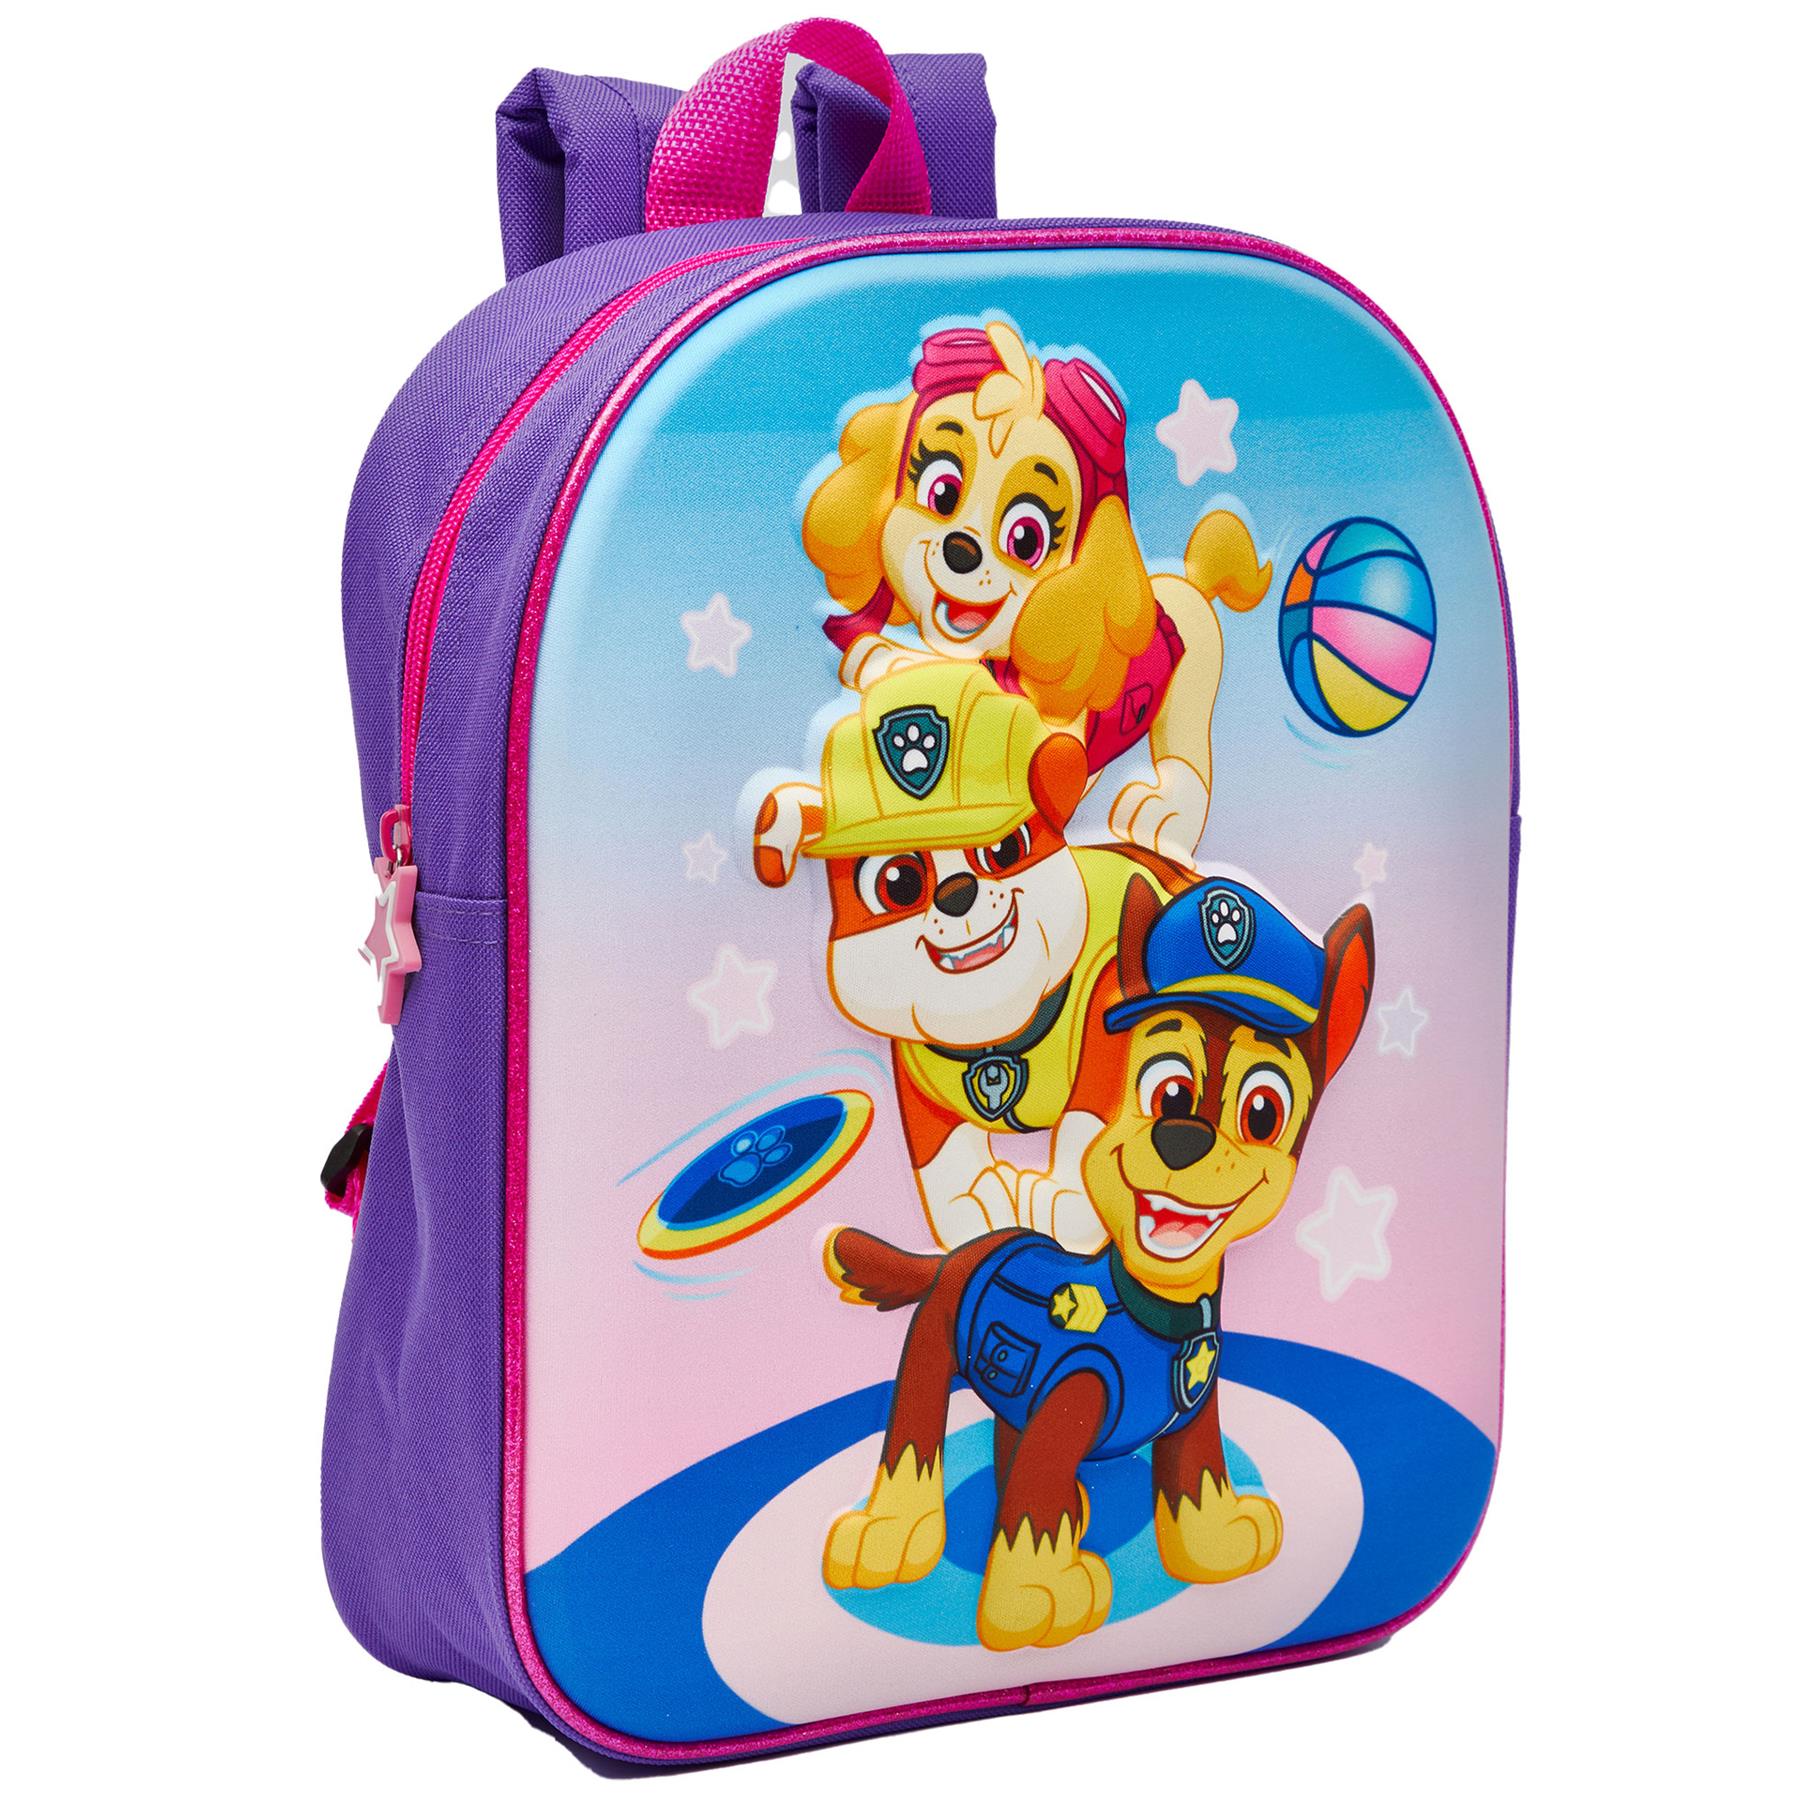 Officially Licensed Paw Patrol Playtime Fun Eva Character School Travel Backpack